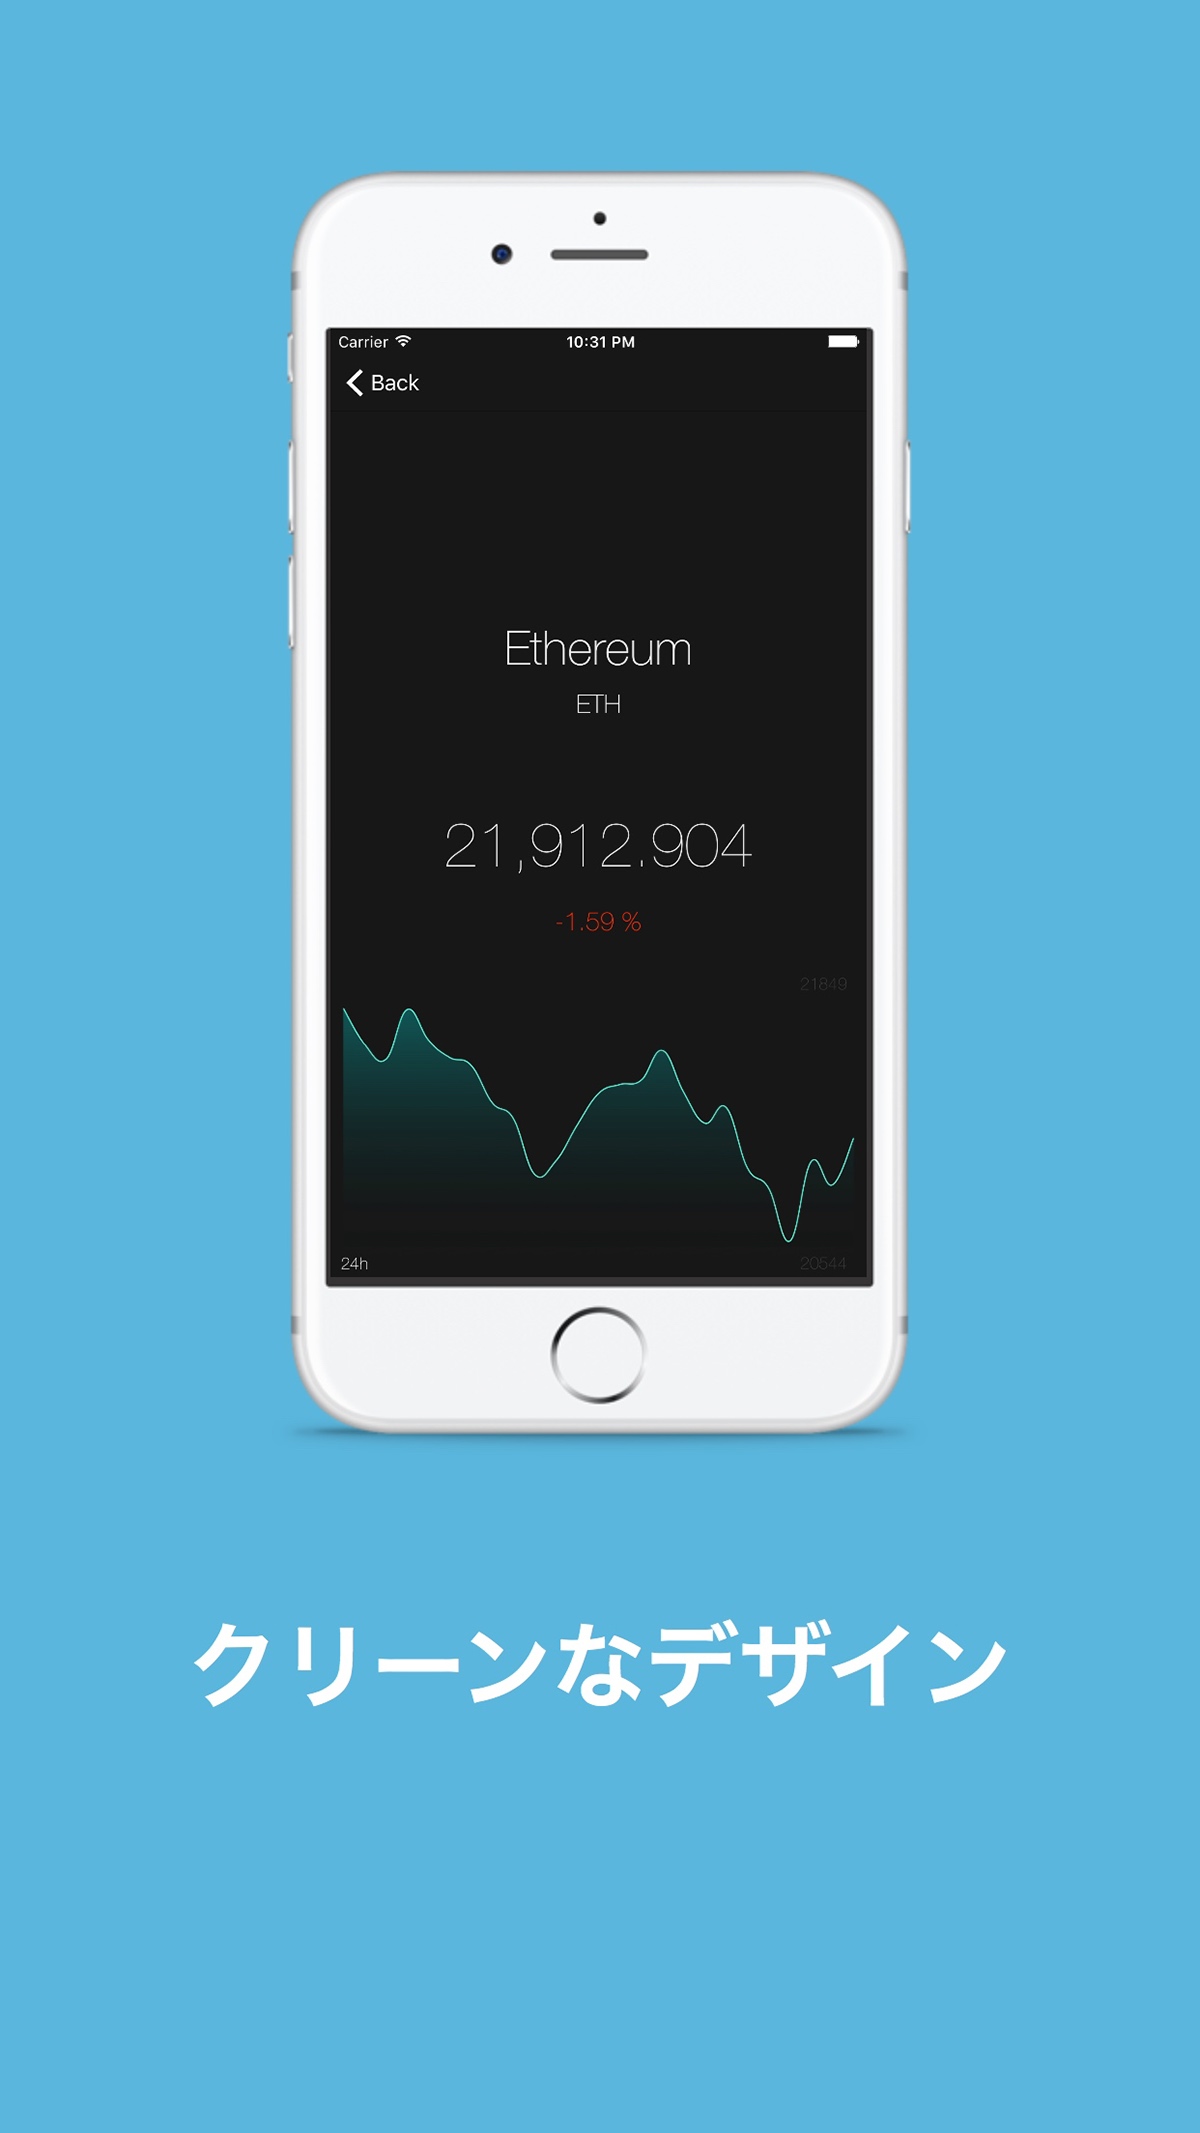 crypton cryptocurrencies japan appstore Screenshots app preview iphone